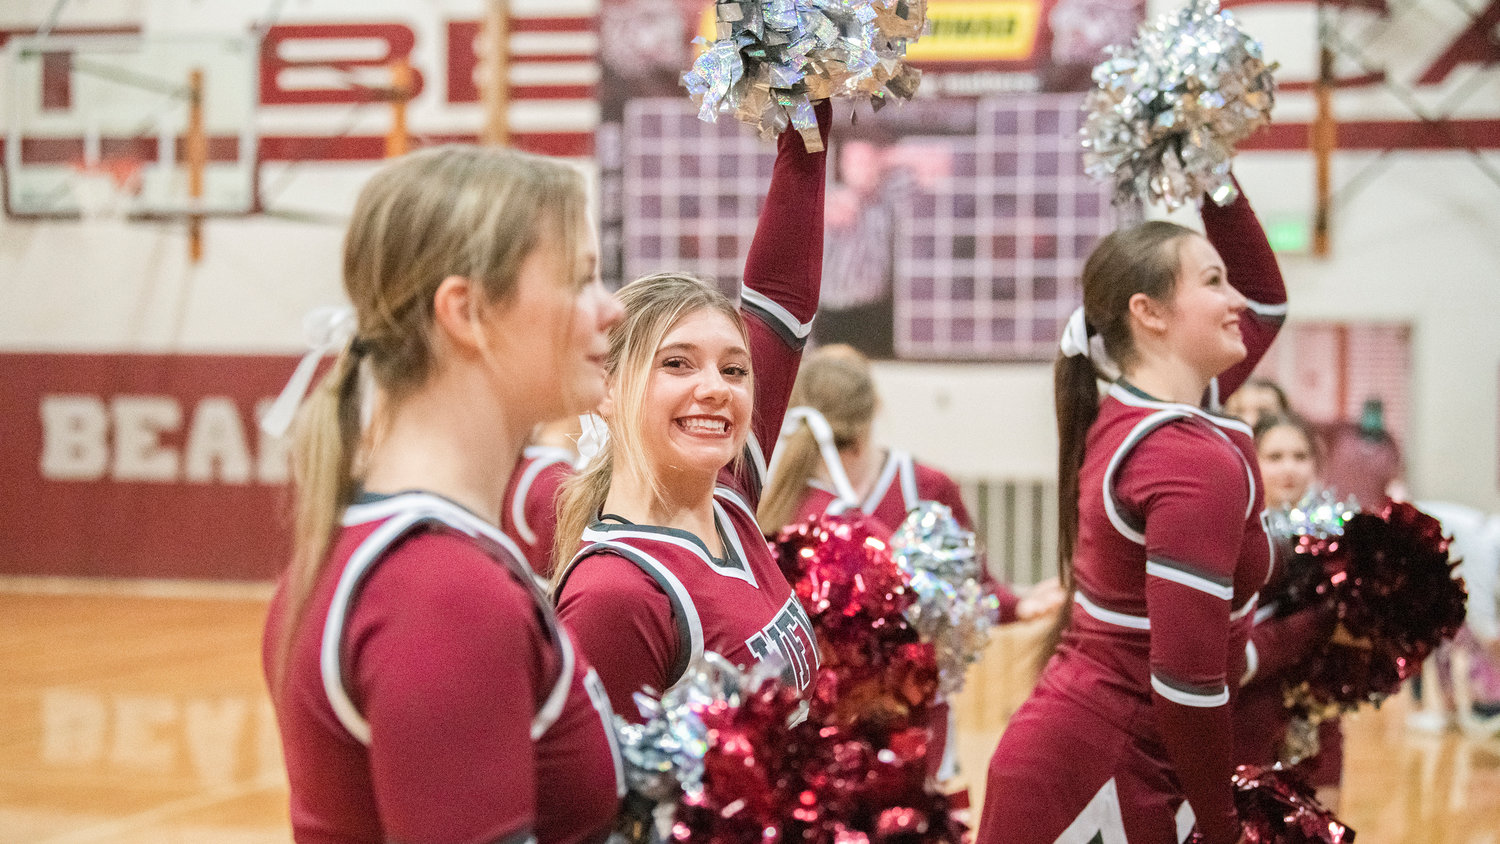 Bearcat cheerleaders smile and raise their pom-poms during a basketball game in Chehalis Tuesday night.